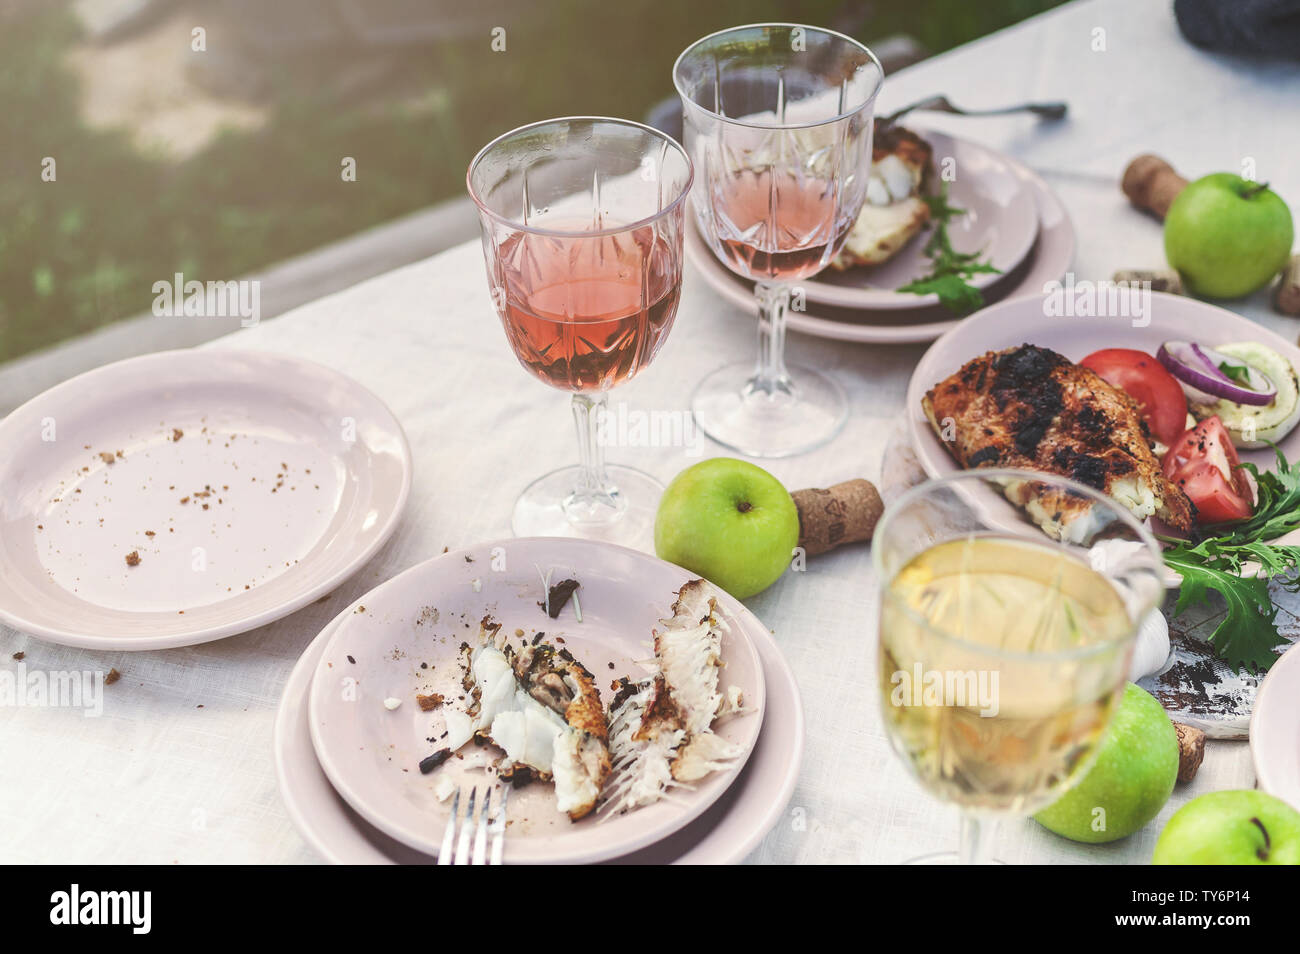 Glasses of white and rose wine, grilled fish plates, vegetables, salad and fruits on the table. Summer party in the backyard. Horizontal shot Stock Photo